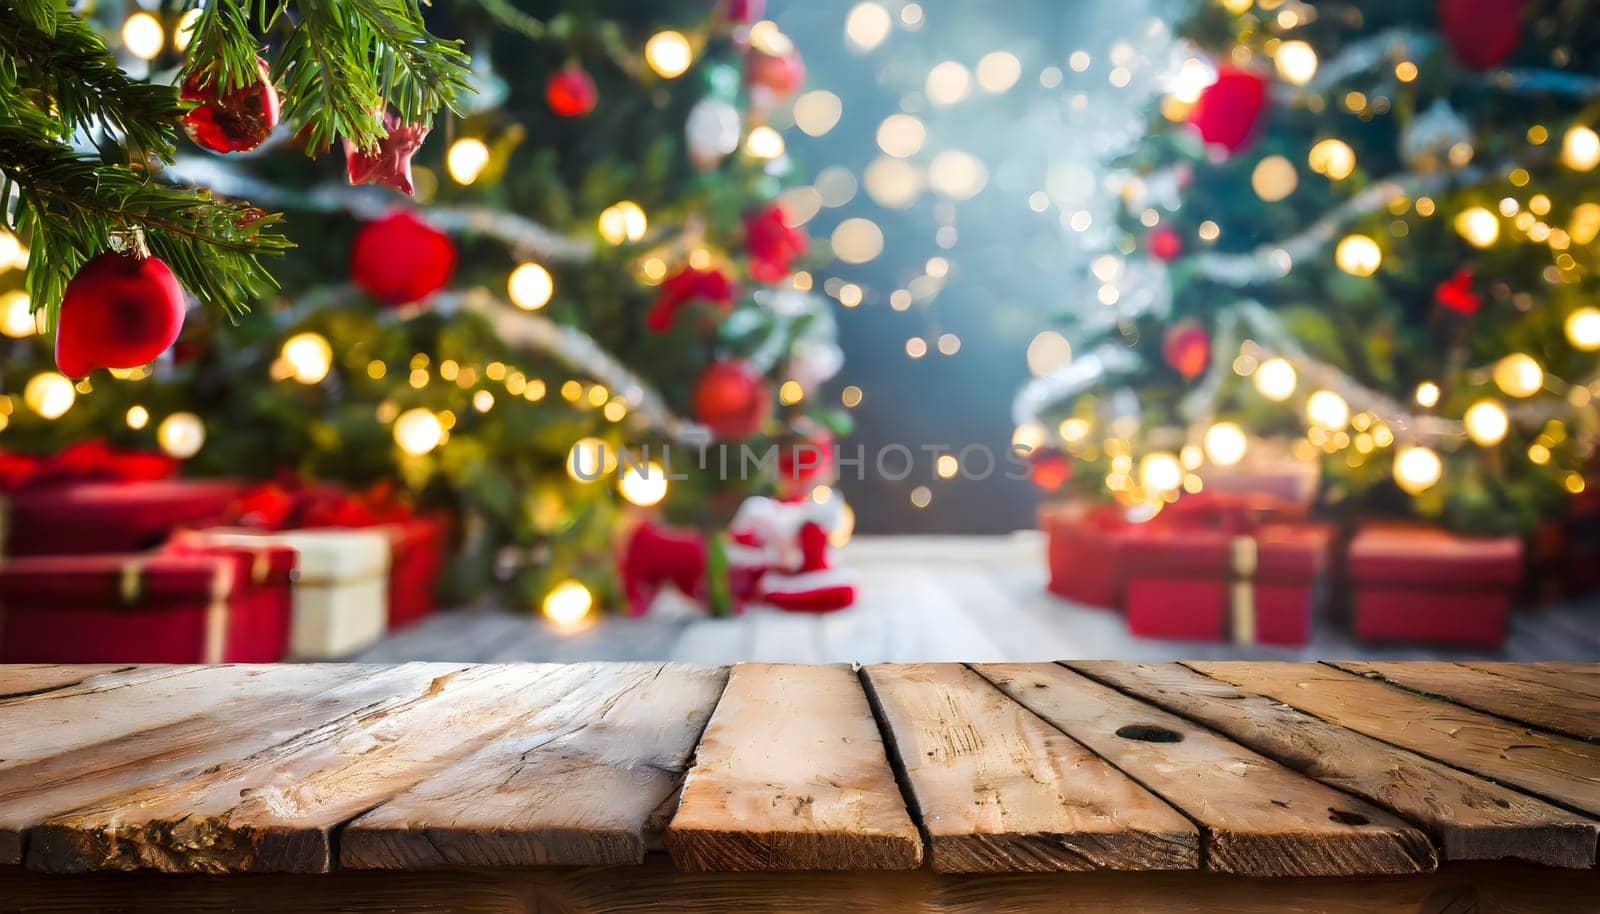 Holidays background with illuminated Christmas tree, gifts and decoration in background and a wooden table with of free space for your decoration. by Designlab